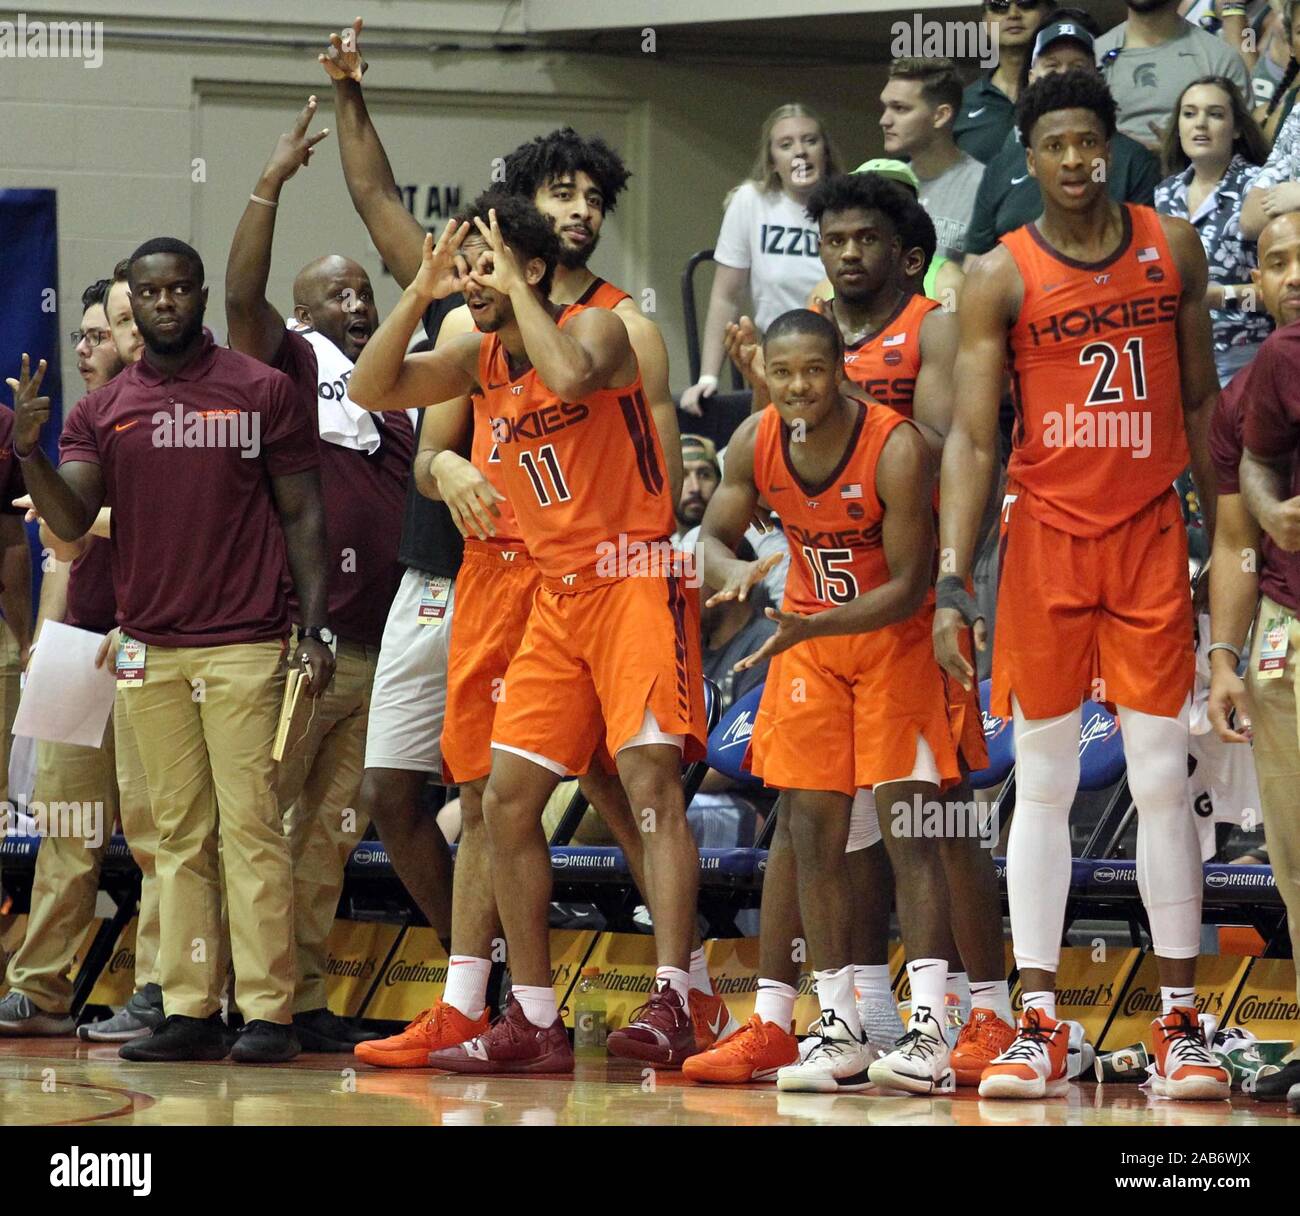 November 23, 2019 - The Hokies bench cheers during a game between the Virginia Tech Hokies and the Michigan State Spartans at the Lahaina Civic Center on the island of Maui in Lahaina, HI - Michael Sullivan/CSM. Stock Photo